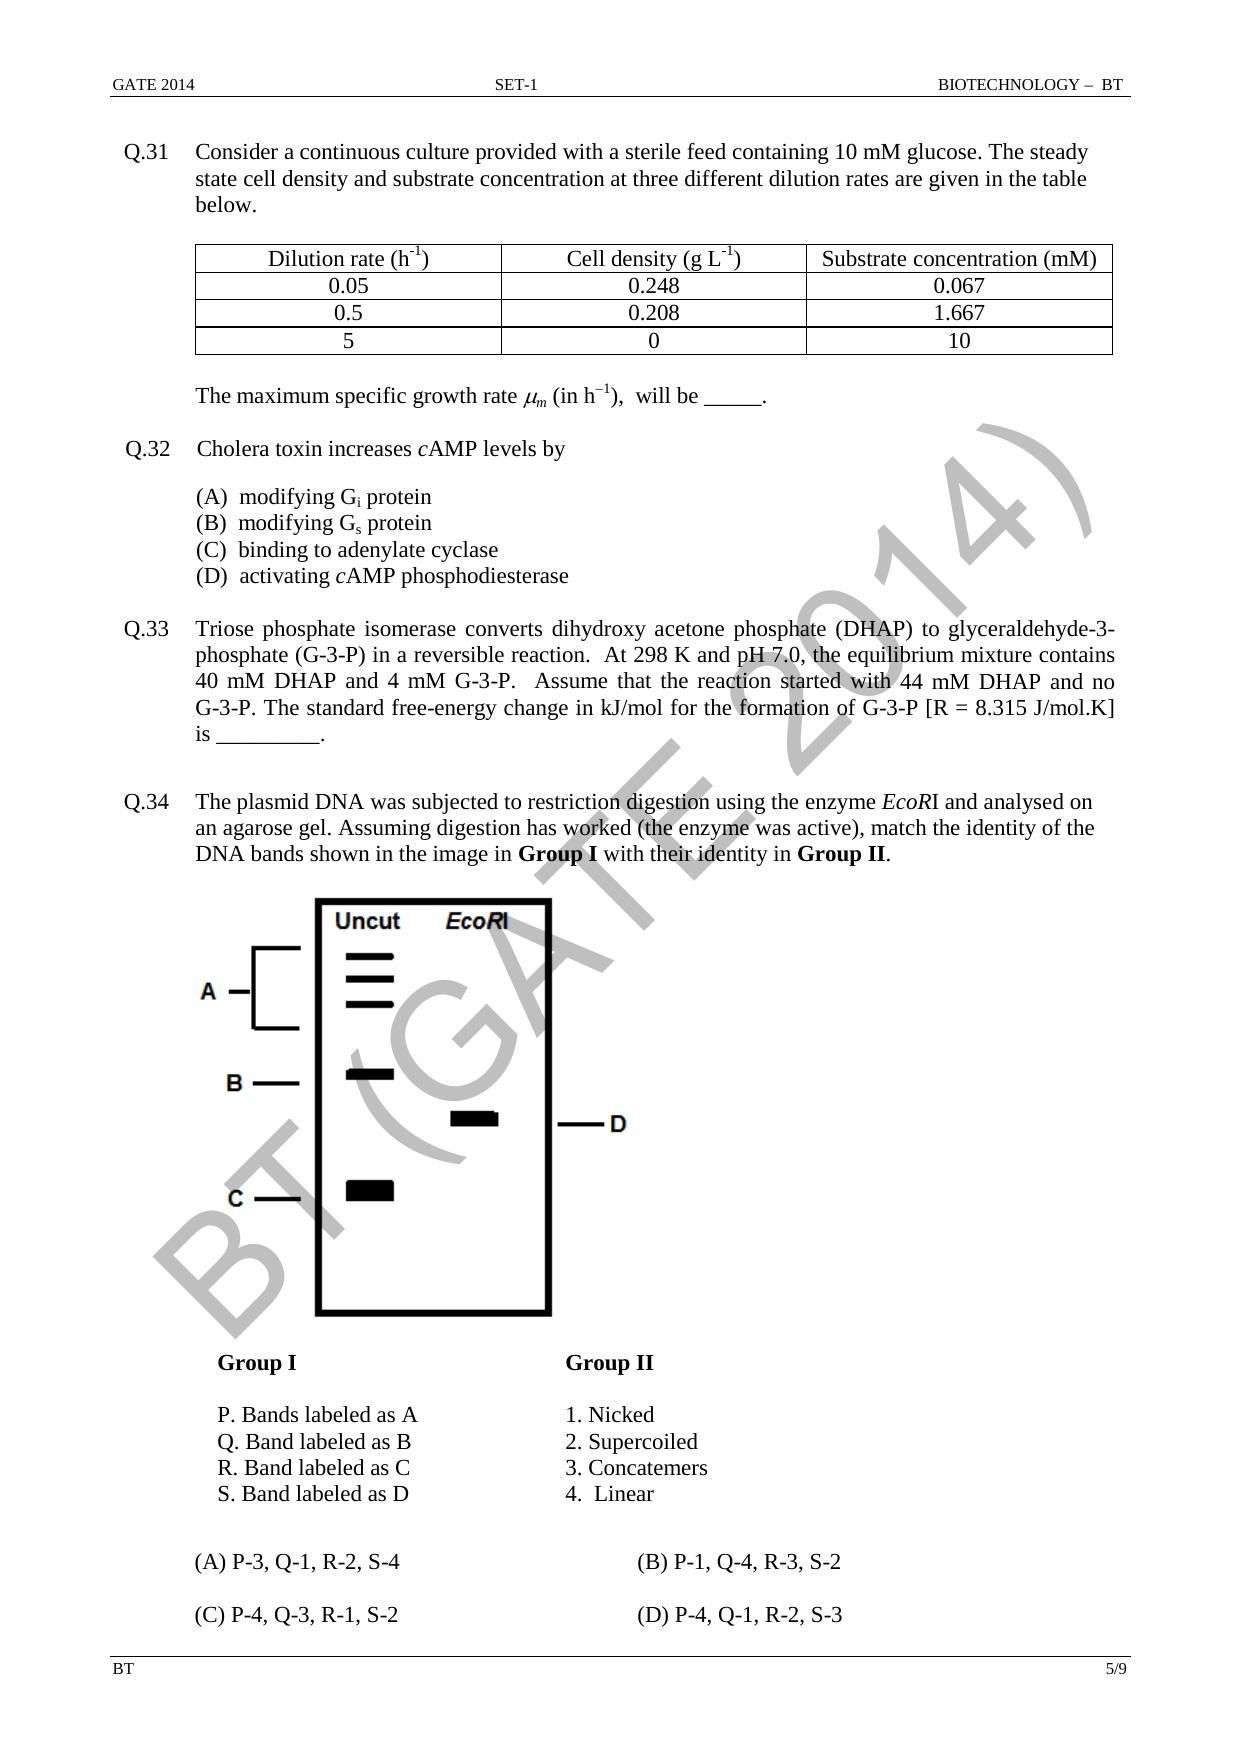 GATE 2014 Biotechnology (BT) Question Paper with Answer Key - Page 11